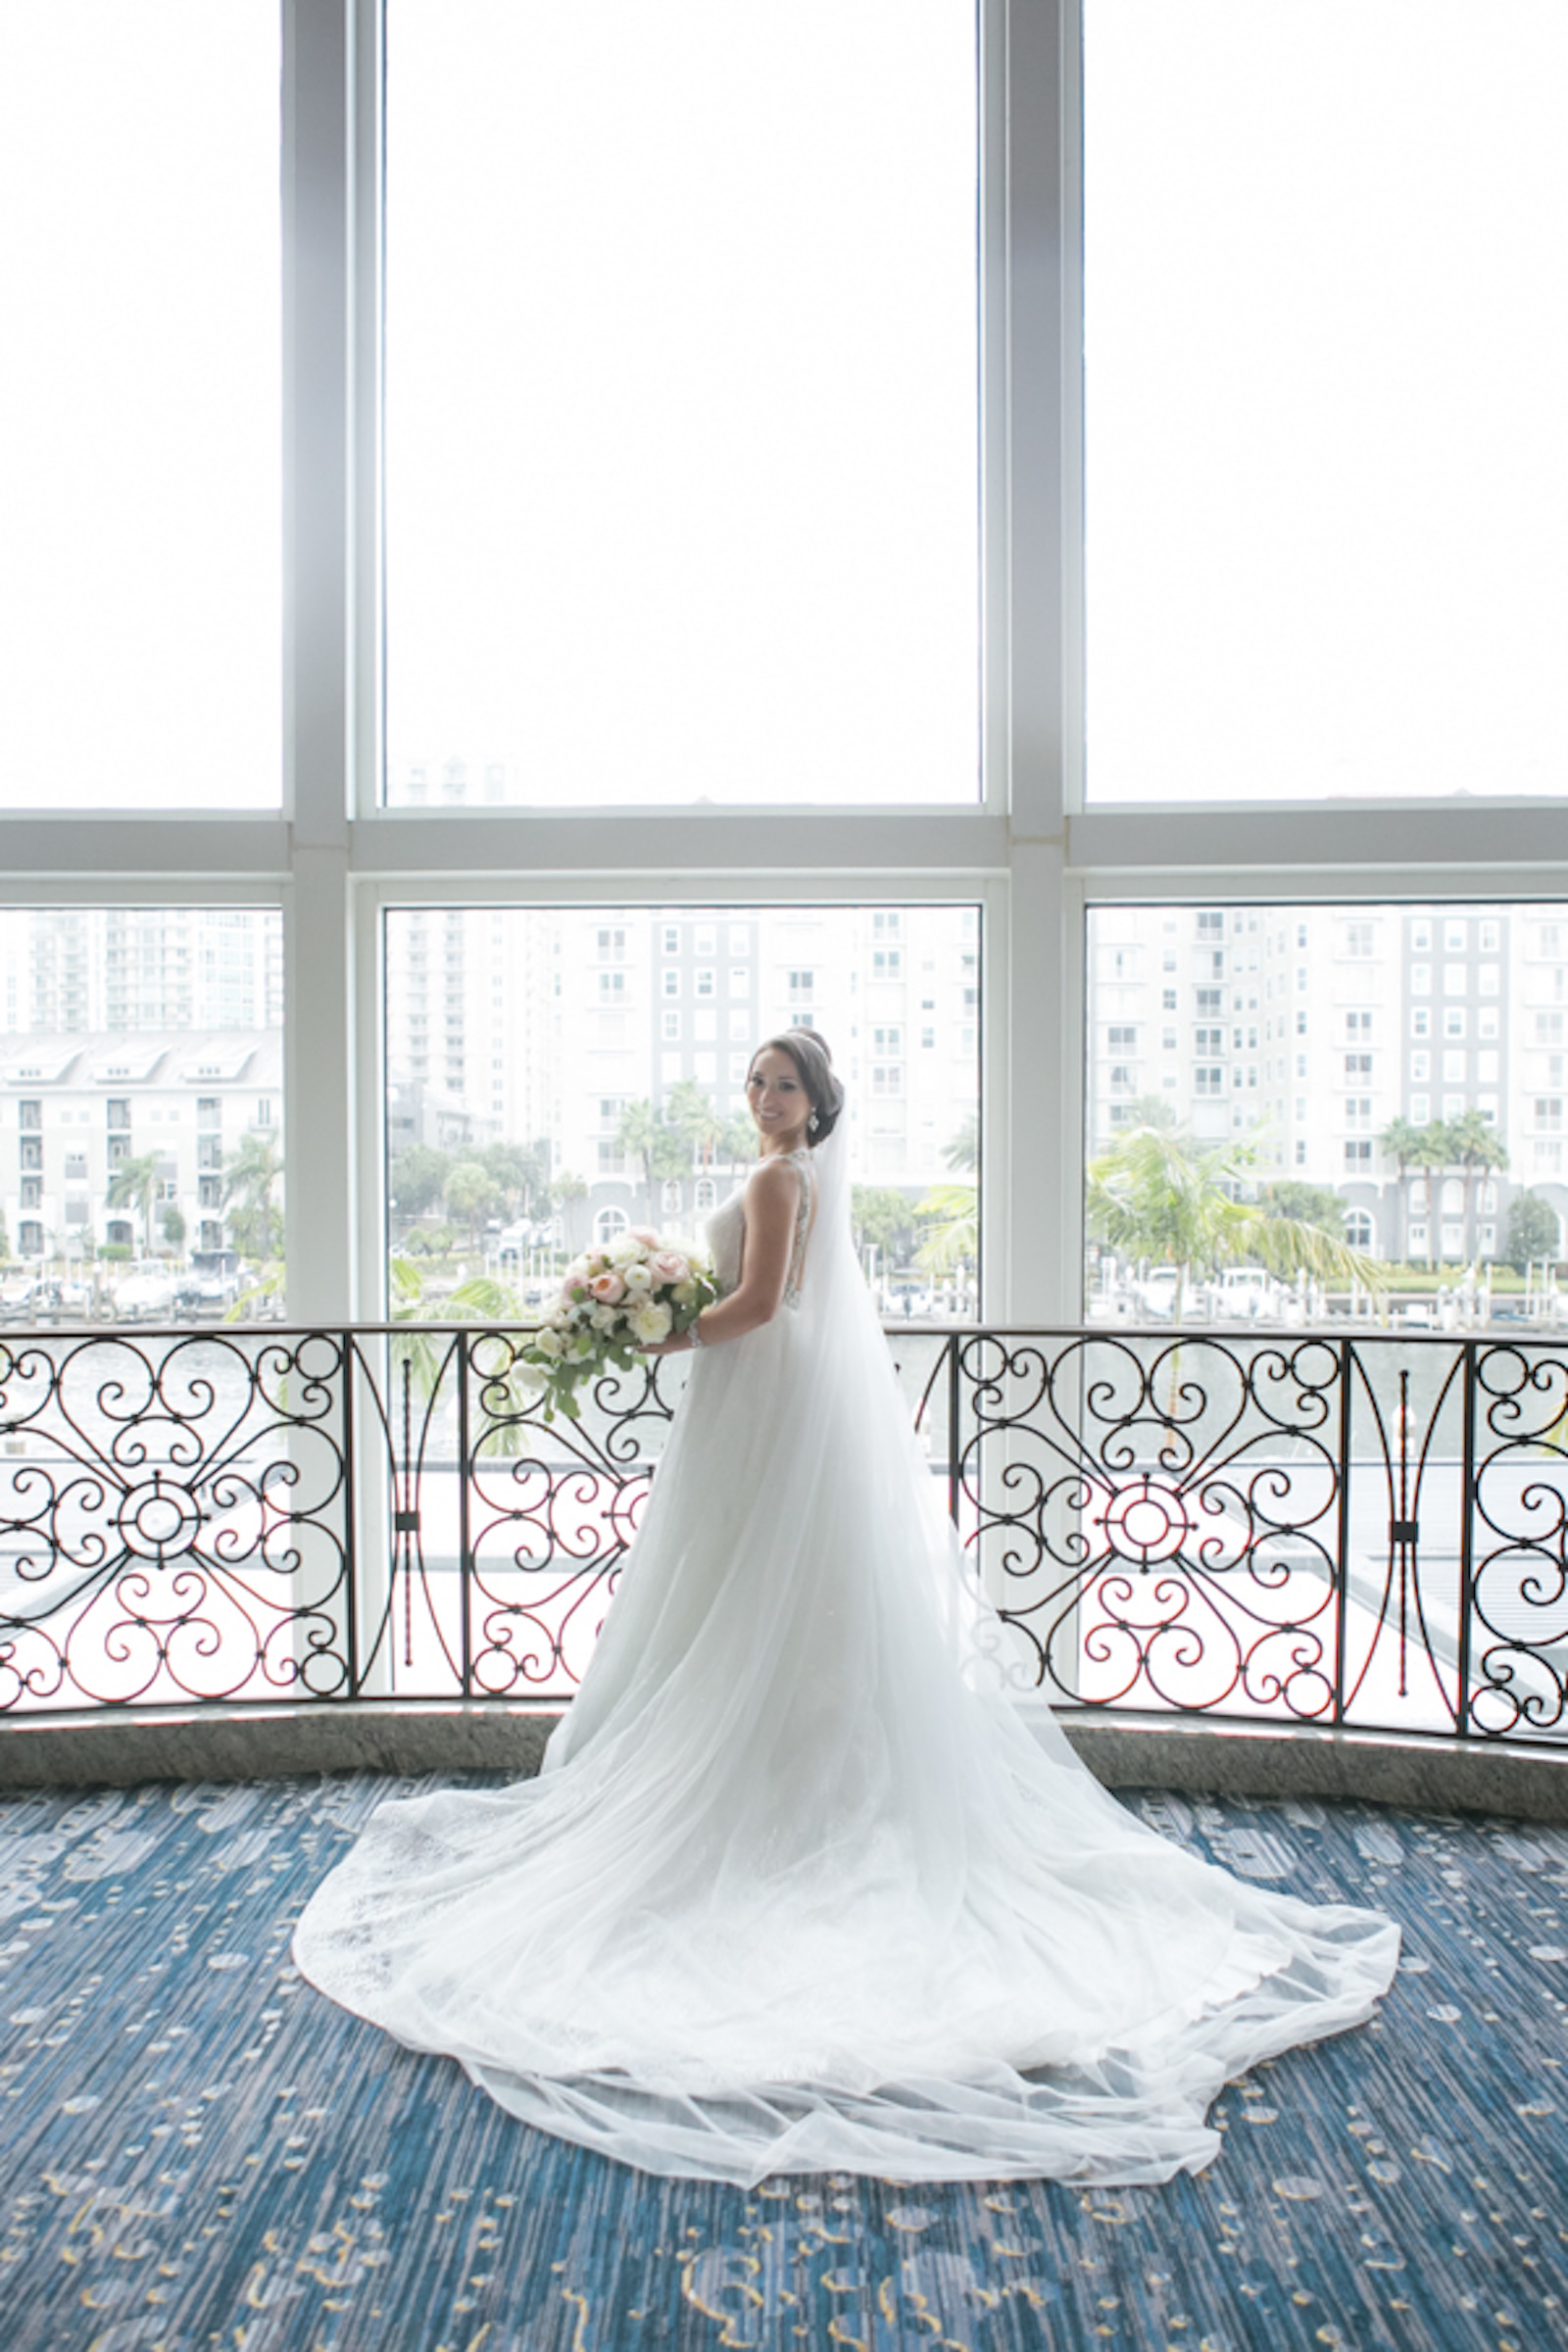 Indoor Downtown Tampa Hotel Window Bridal Portrait at Marriott Water Street | V Neck Illusion Lace A Line Ballgown Wedding Dress with Rhinestone Waist Band and Cathedral Veil | Blush Pink and White Roses and Peonies Wedding Bridal Bouquet